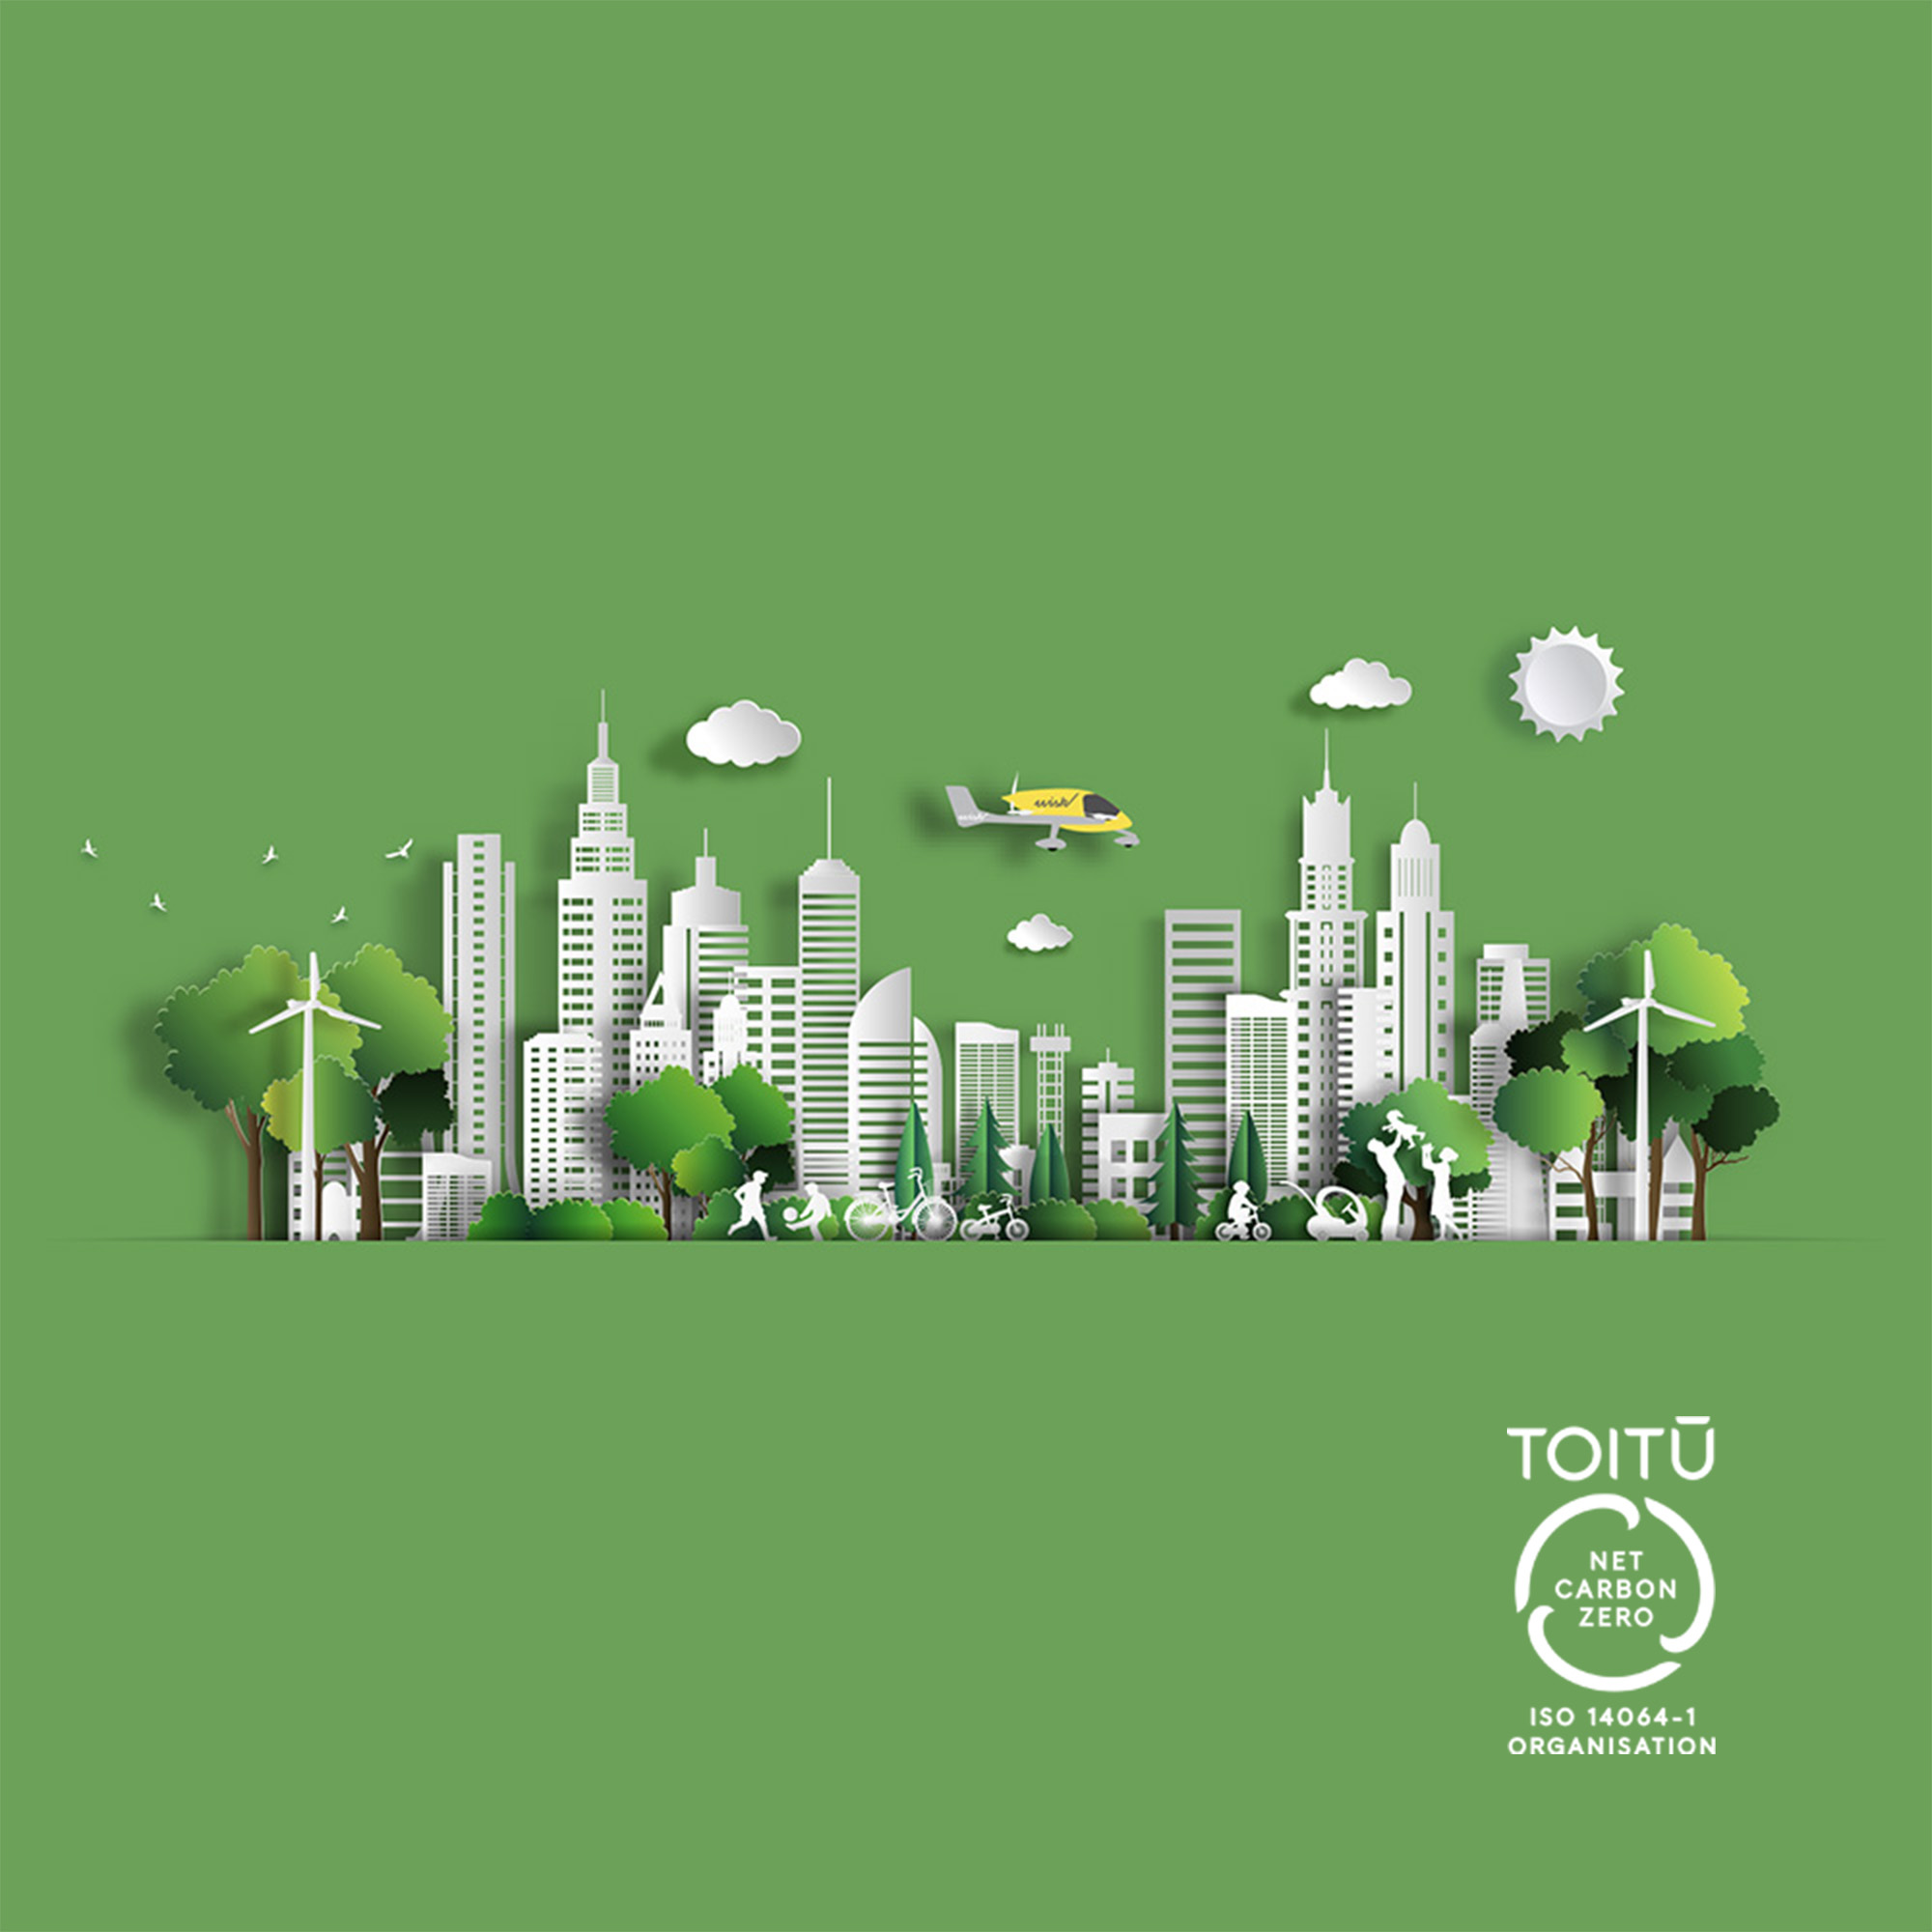 Image of a city on a green background with a Toitū Net Carbonzero Certification logo